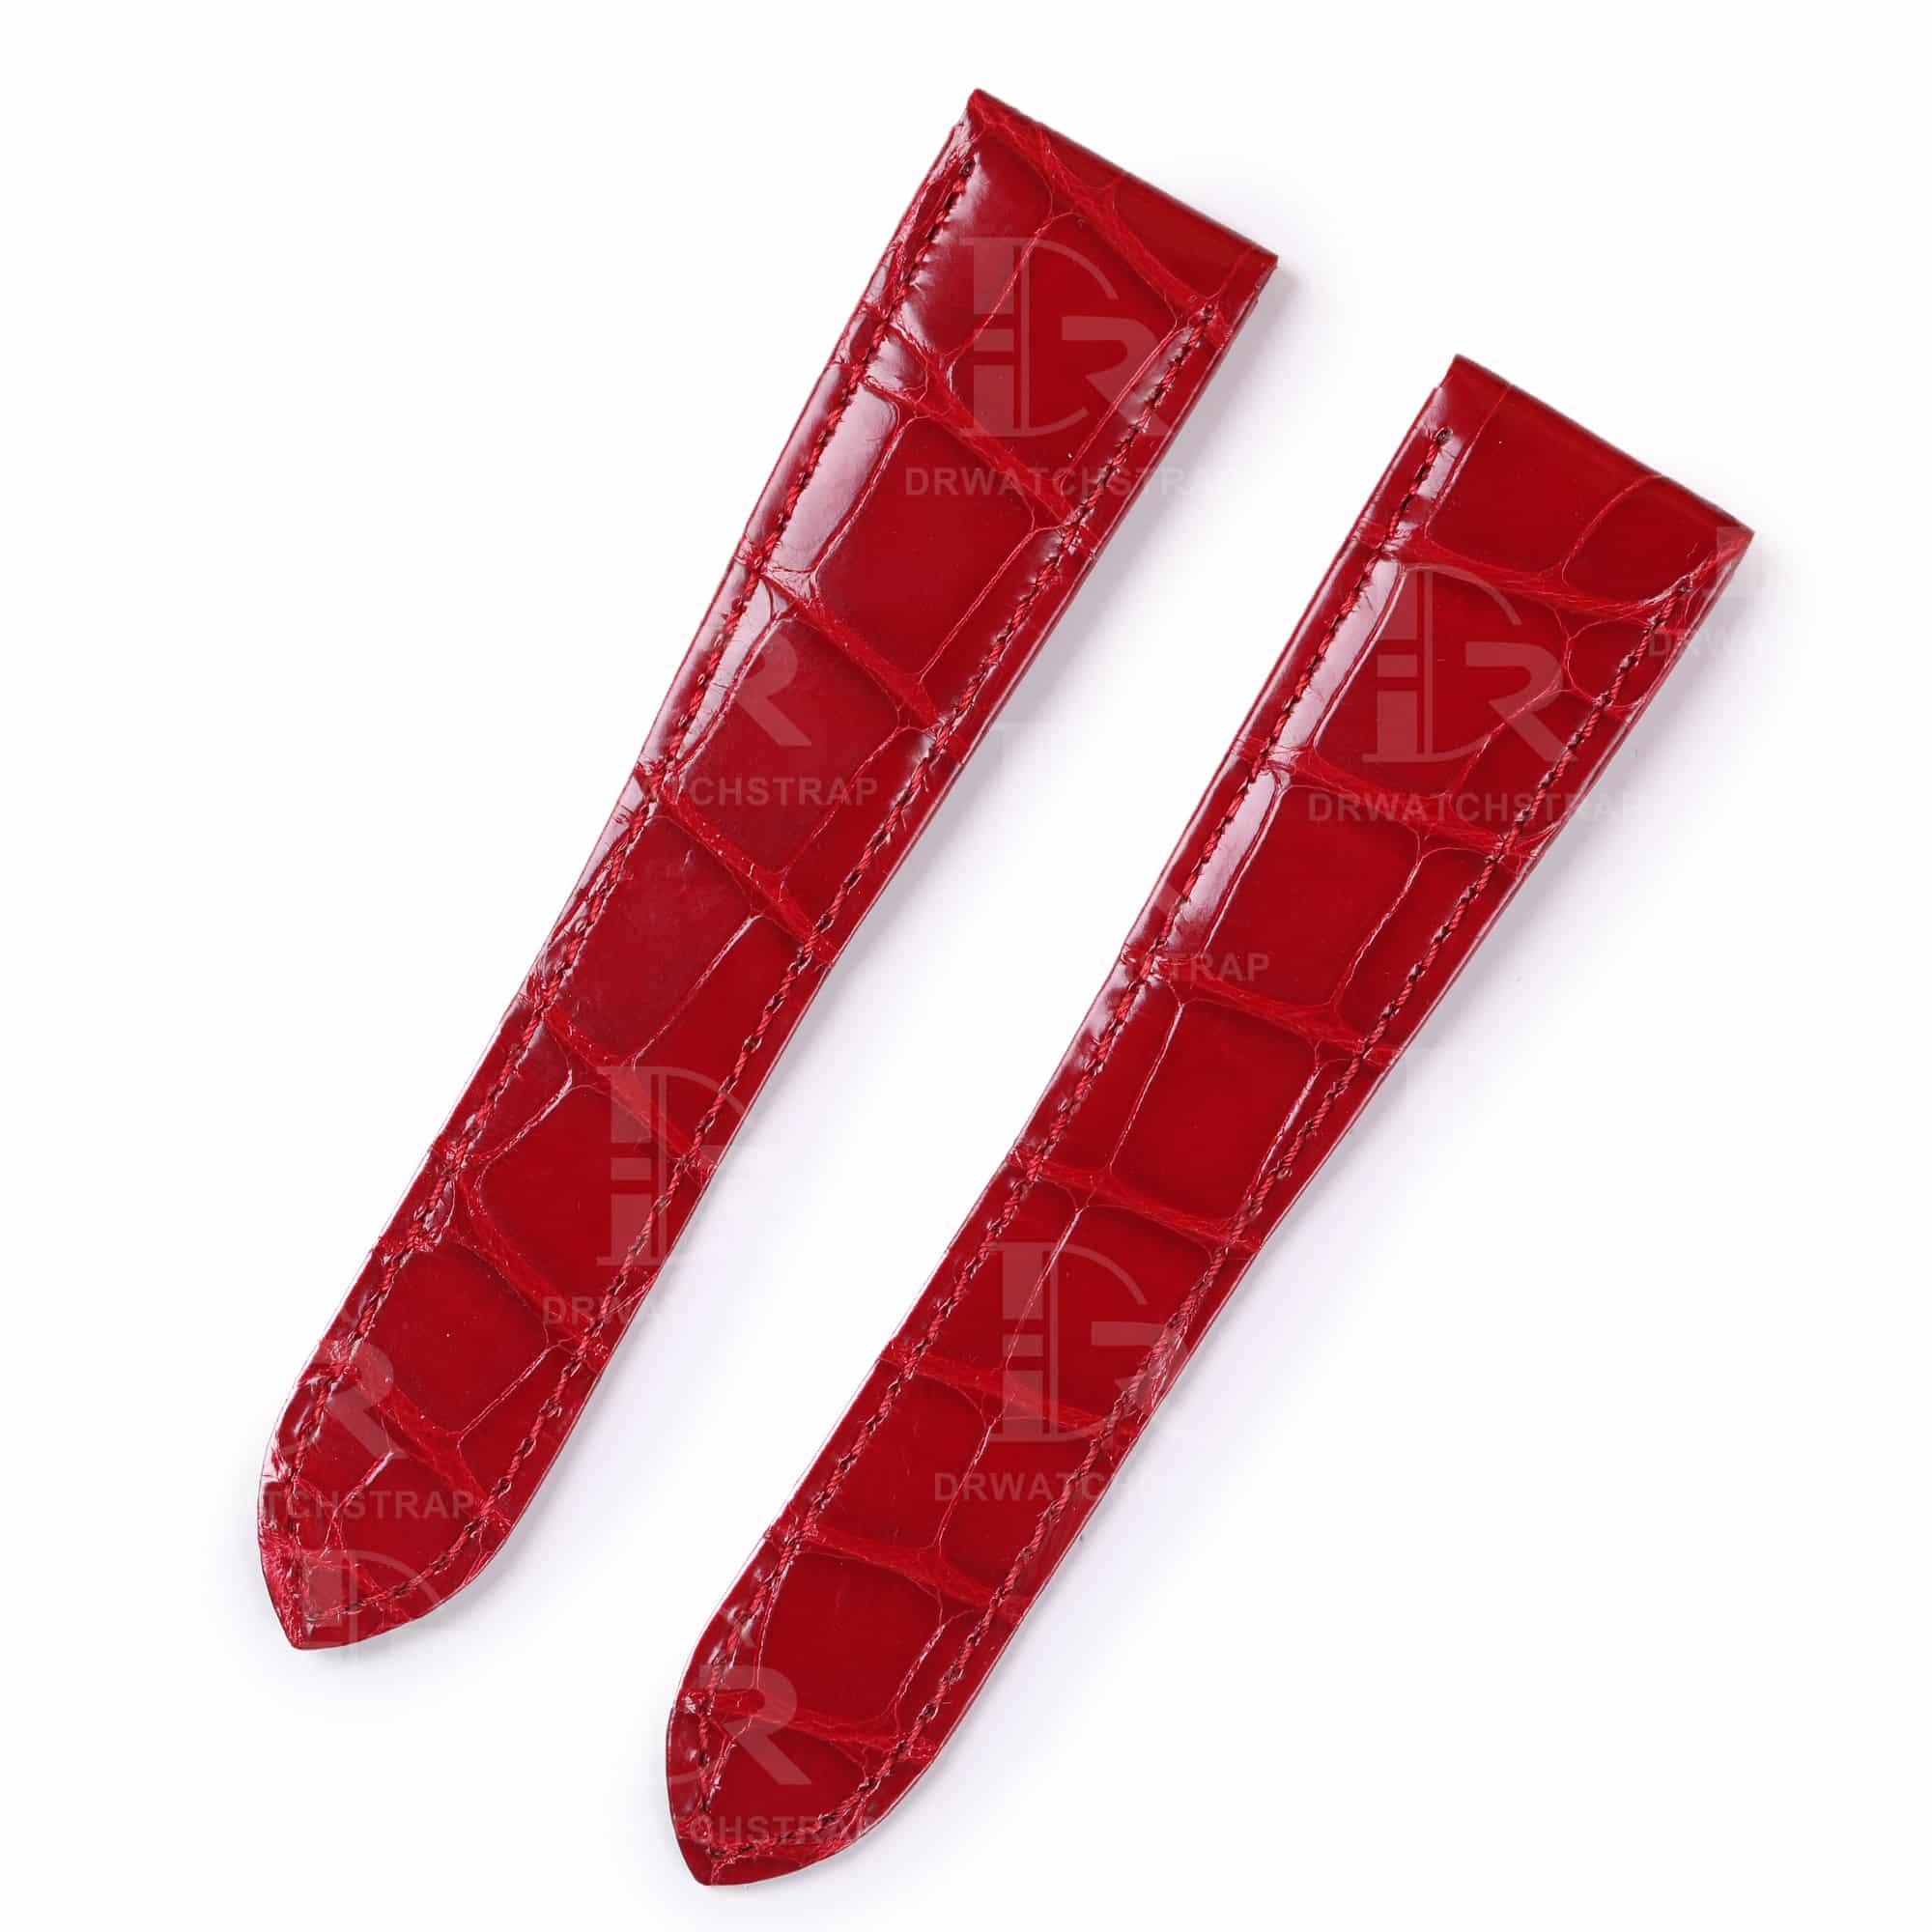 Best quality replacement red alligator crocodile leather Cartier Calibre watch strap and watch band for Cartier Calibre dive watches online - Aftermarket leather watchbands for Cartier Calibre at a low price